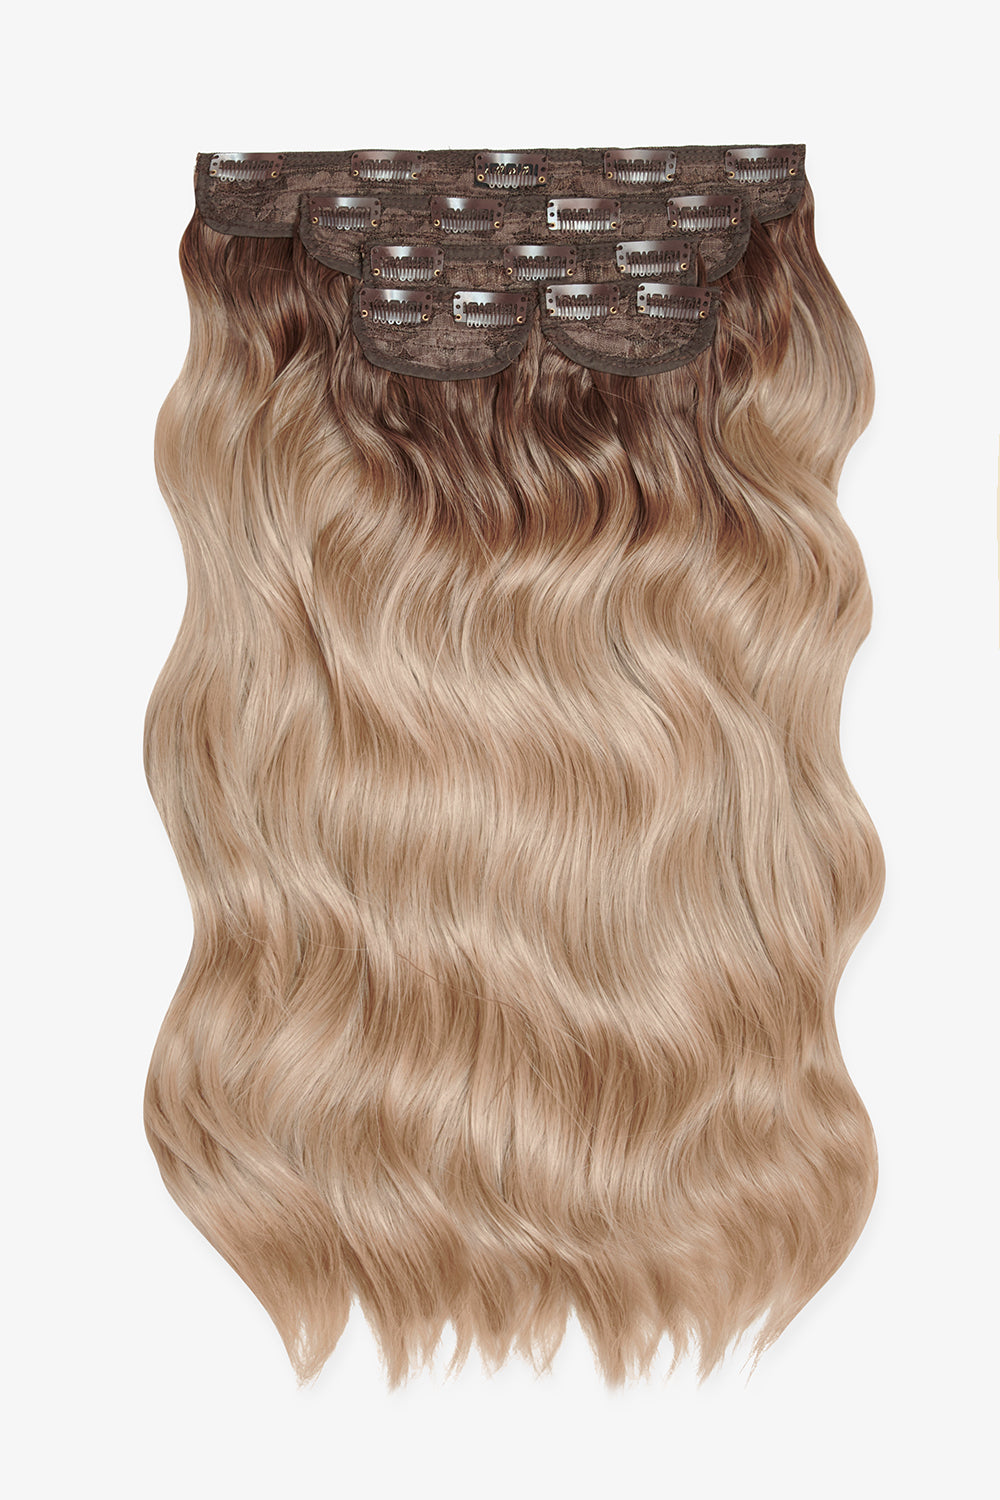 Super Thick 22’’ 5 Piece Brushed Out Wave Clip In Hair Extensions - Rooted California Blonde